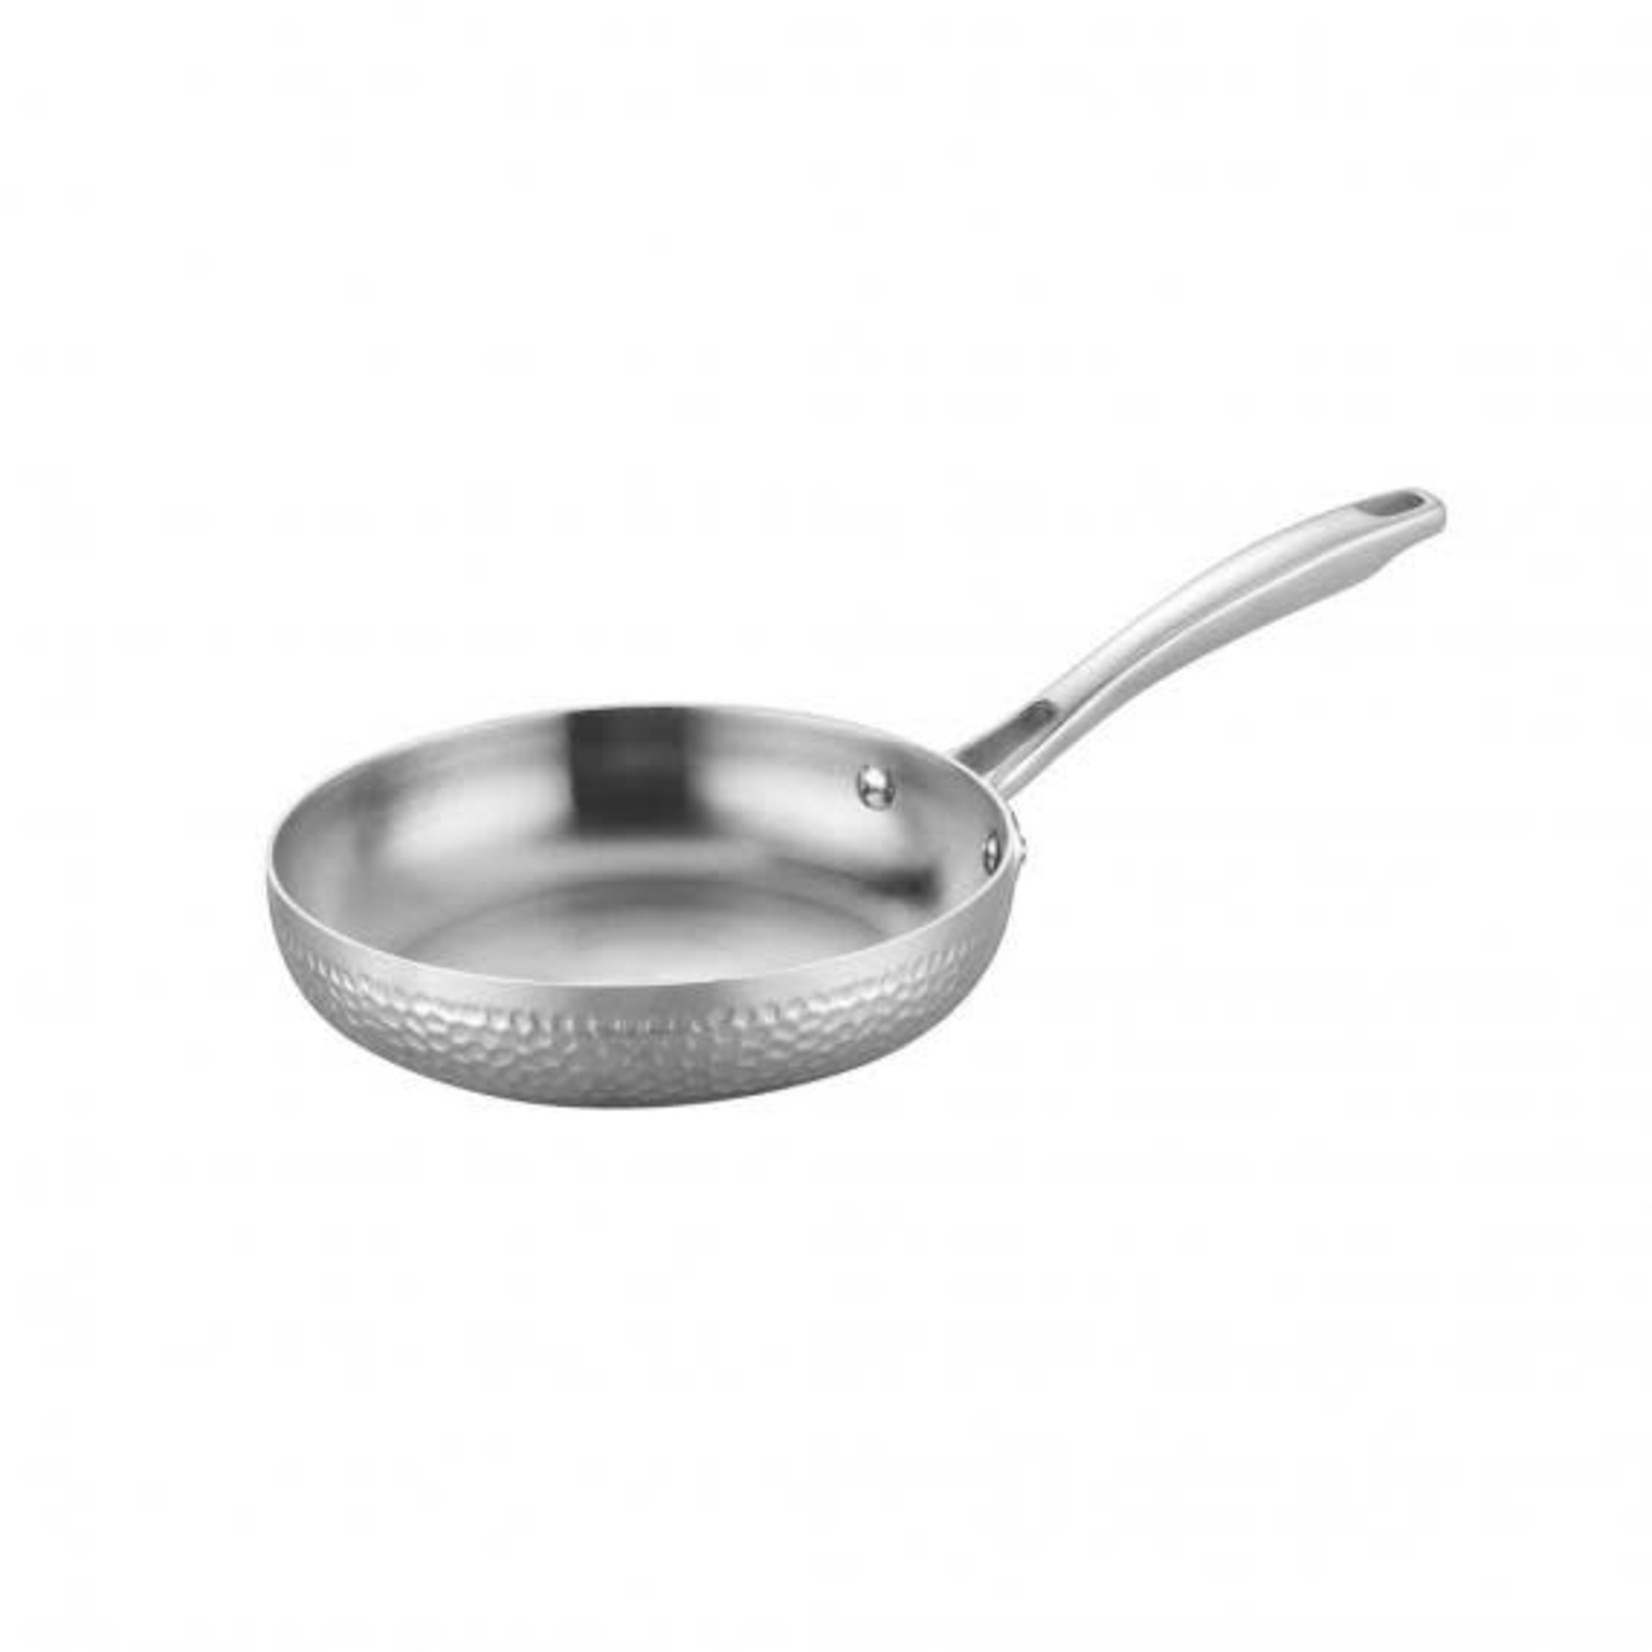 Cuisinart Hammered Collection Tri-Ply 10" Skillet